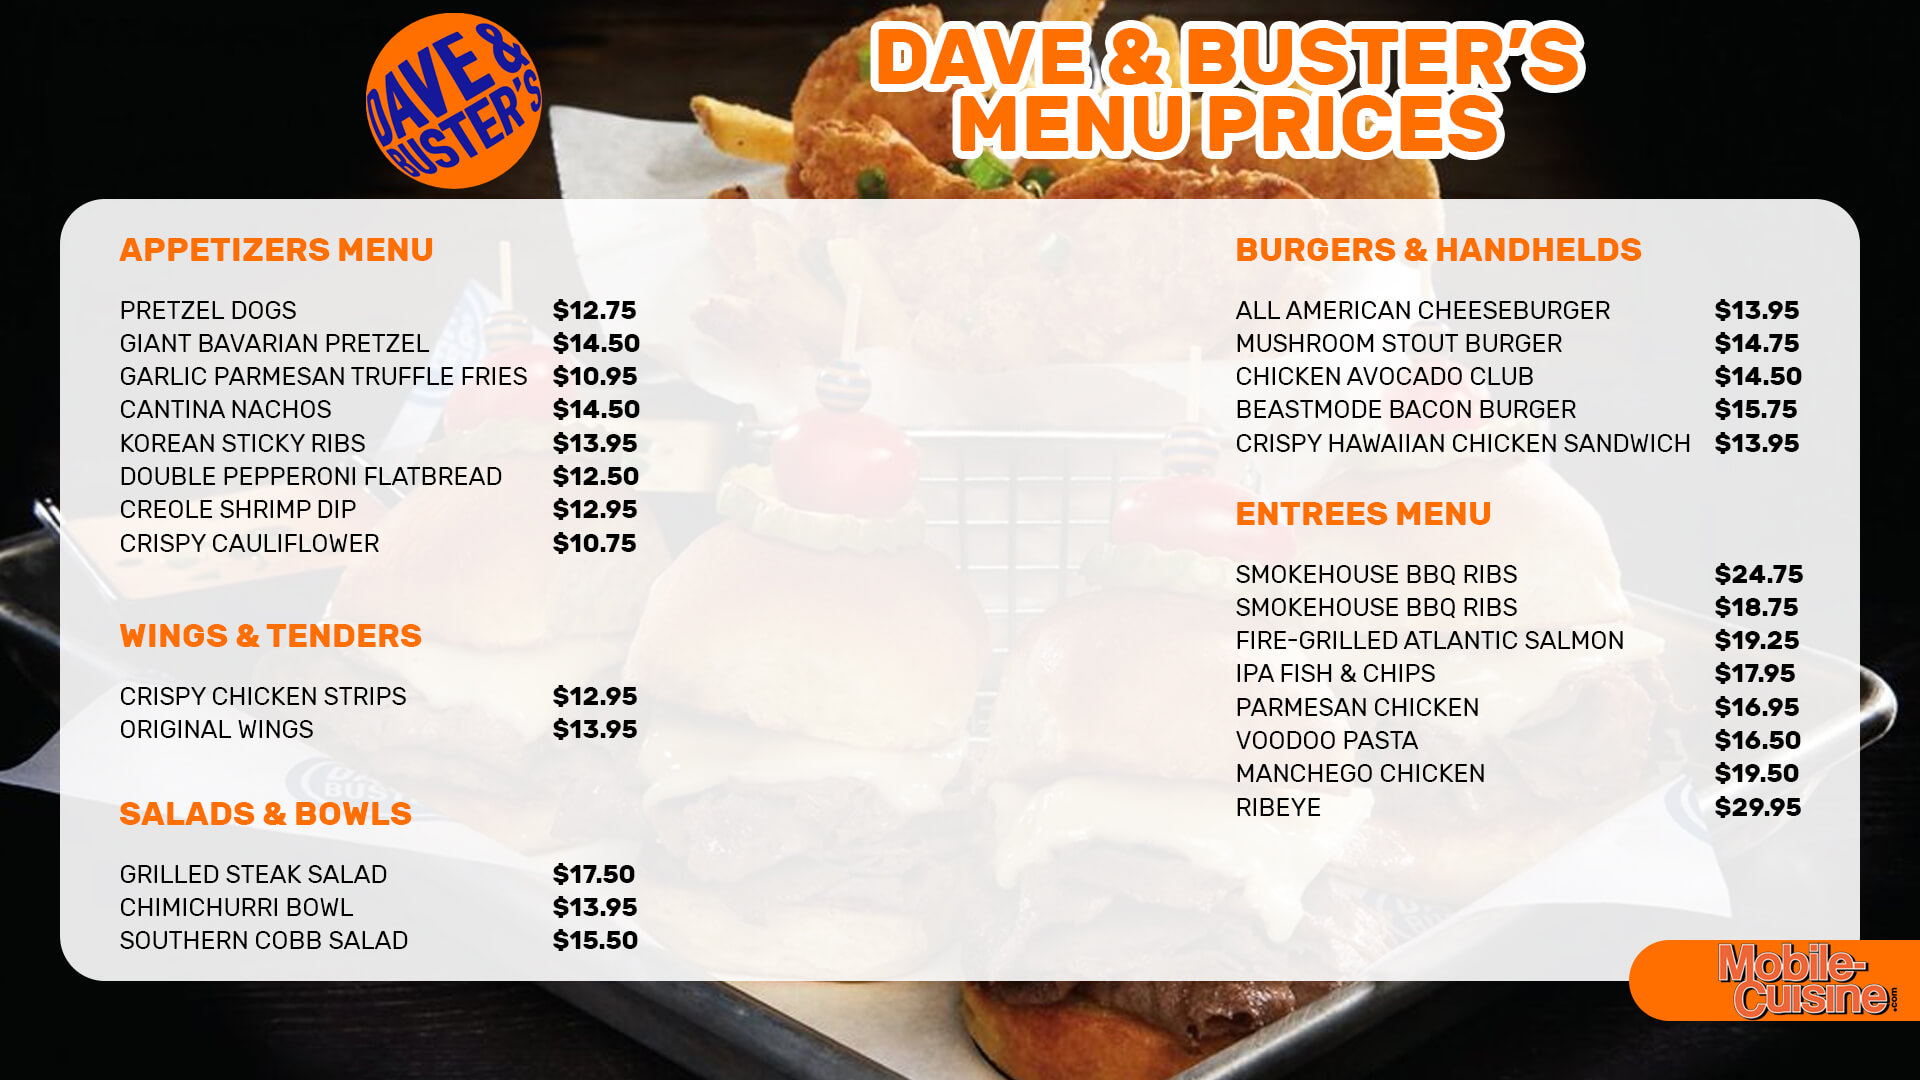 Dave & Buster’s menu prices